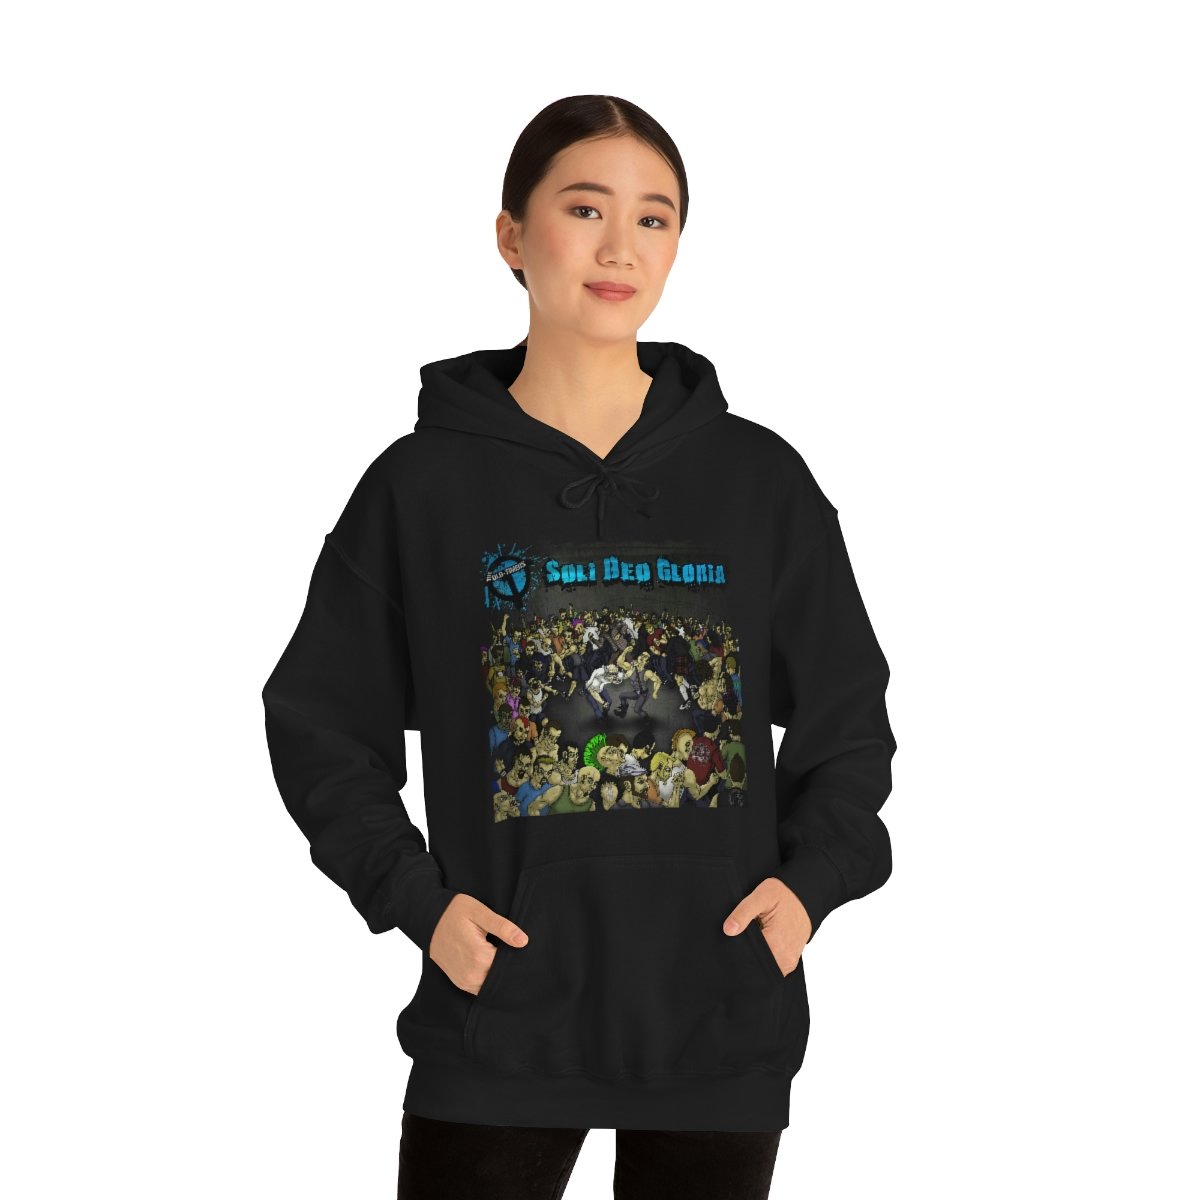 The Old Timers – Soli Deo Gloria (TPR) Pullover Hooded Sweatshirt